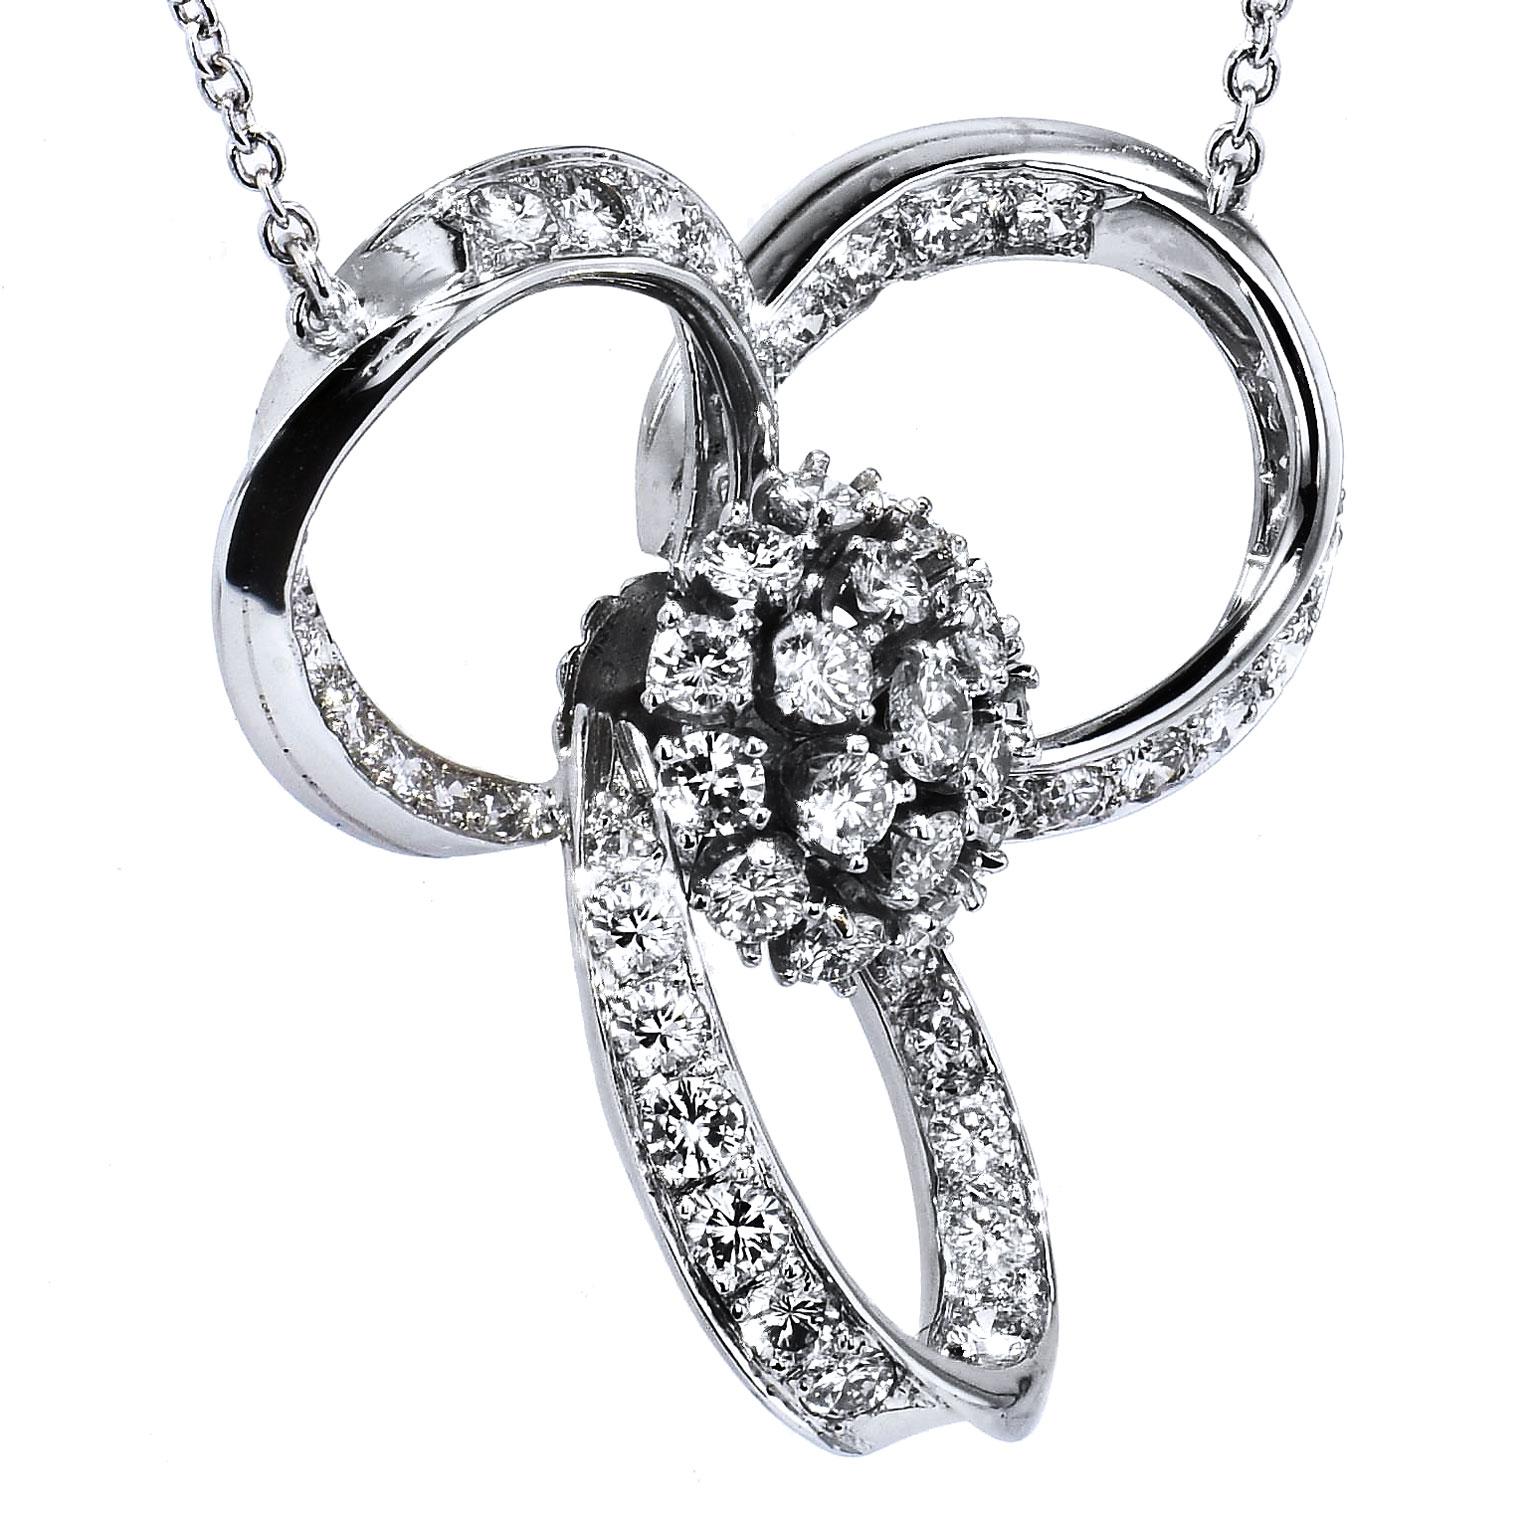 Retro 2.50 Carats of Diamond Triple Loop Platinum Pendant Necklace

Enjoy this previously loved Retro era platinum and diamond pendant. Loops of platinum accented with 2.50 carat of round diamond (H/VS/SI) swoop together to form three oval bows